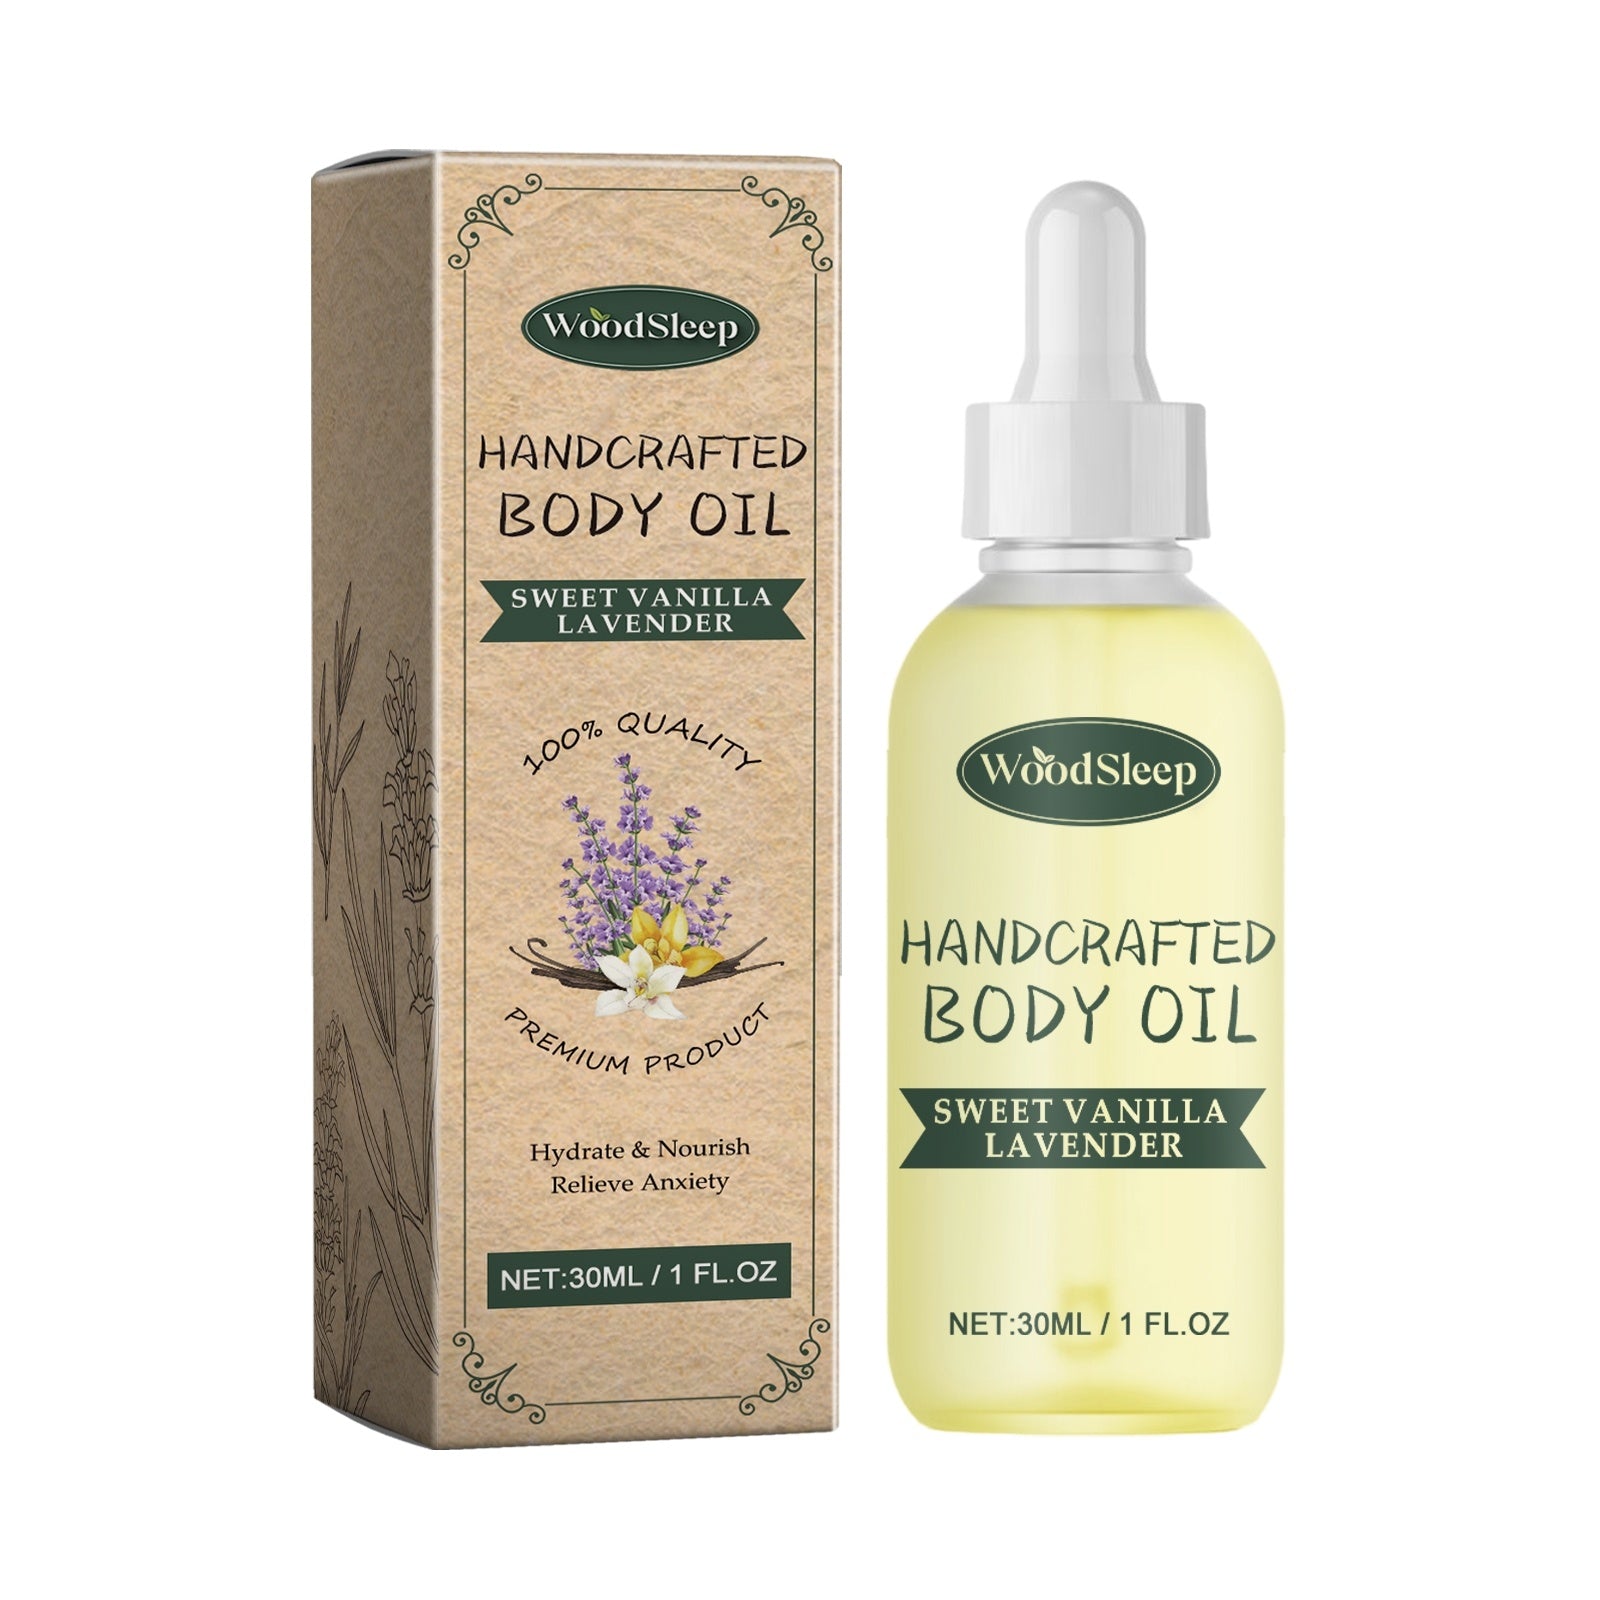 Sweet Vanilla Lavender Handcrafted Body Oil